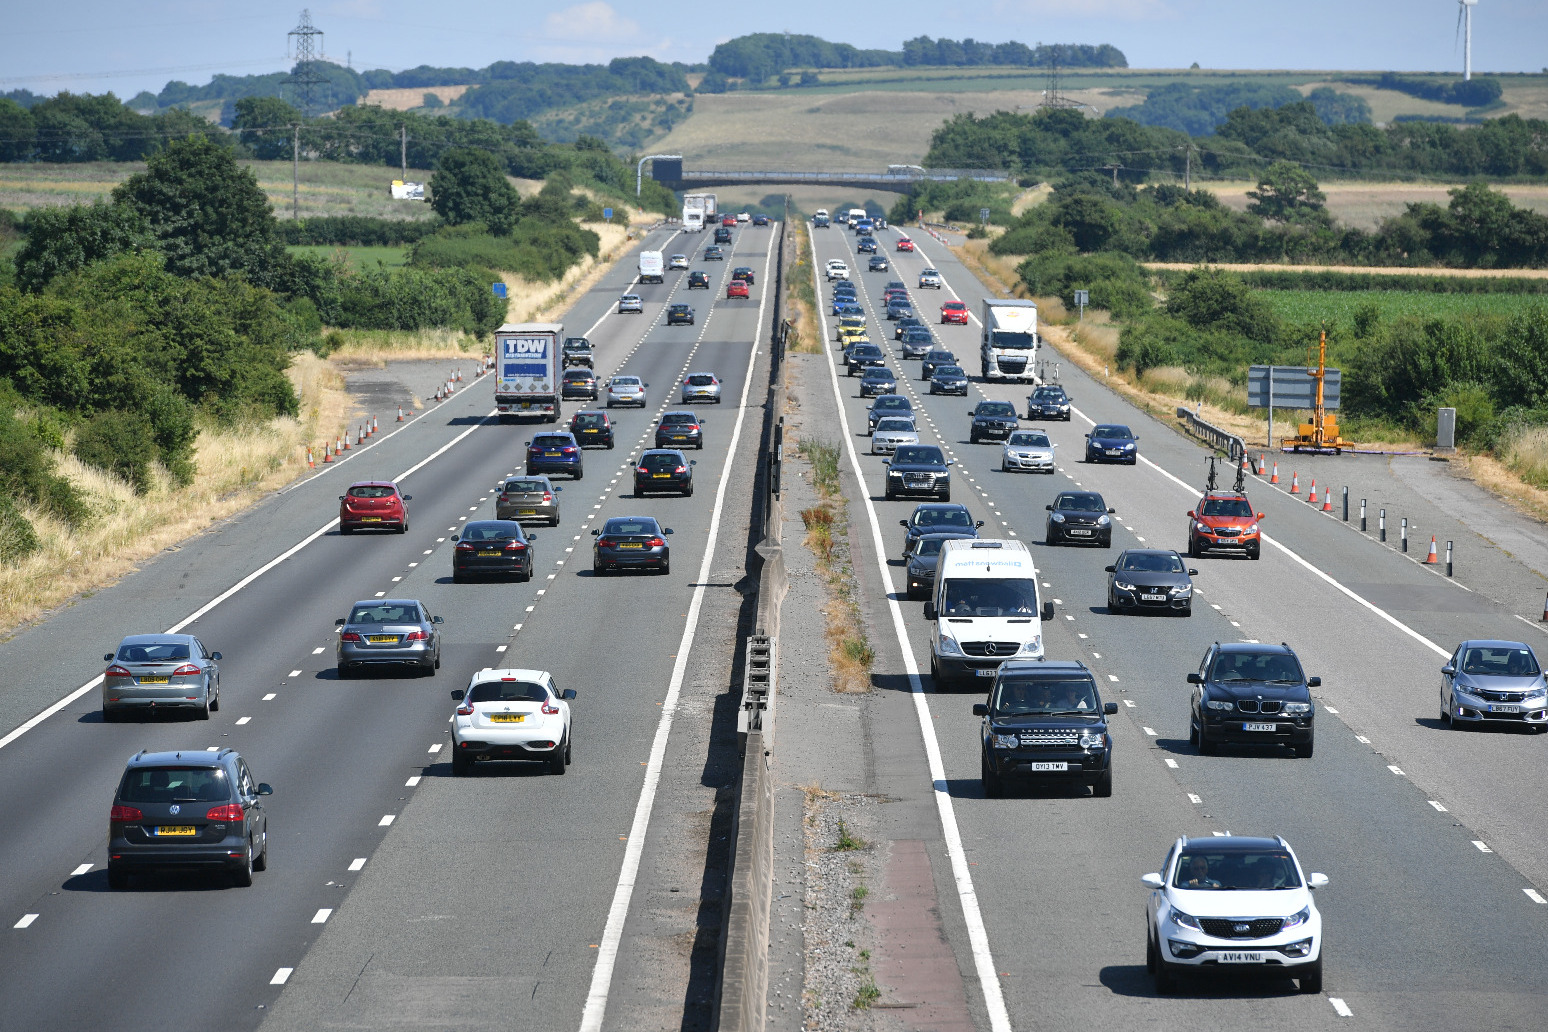 Smart motorway rollout should be paused over safety concerns 